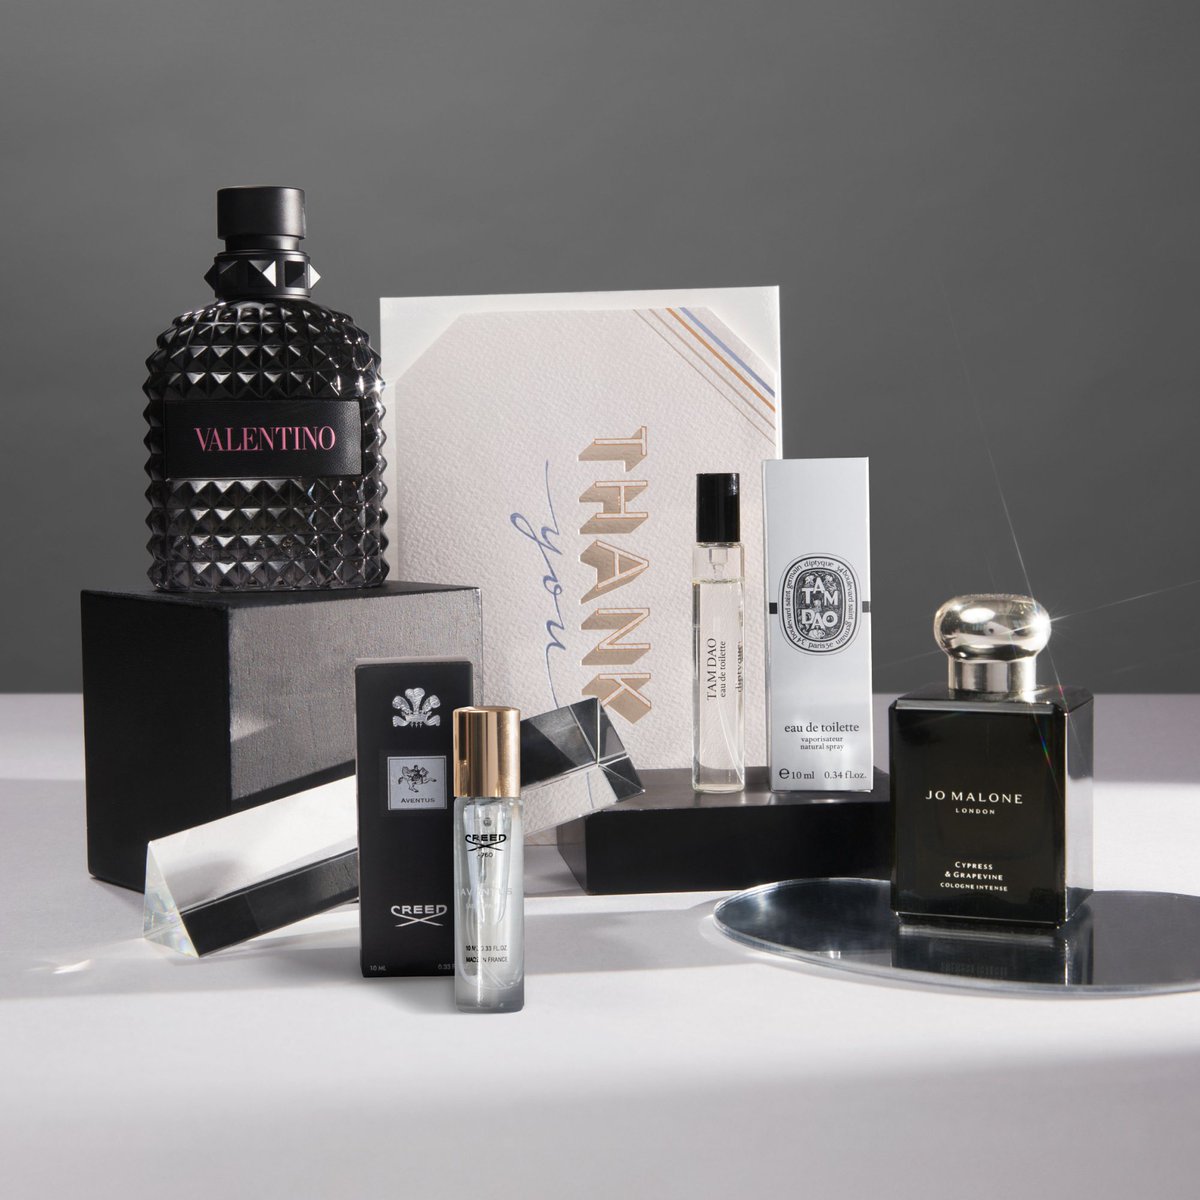 Test drive a new lineup of luxe colognes with GQ's Limited Edition Fragrance Box—packed with premium scents for just $159, offering over $420 worth of value. Subscribers get an exclusive price of $99. Join now for a year of fragrance with four boxes for up to $40 off with code